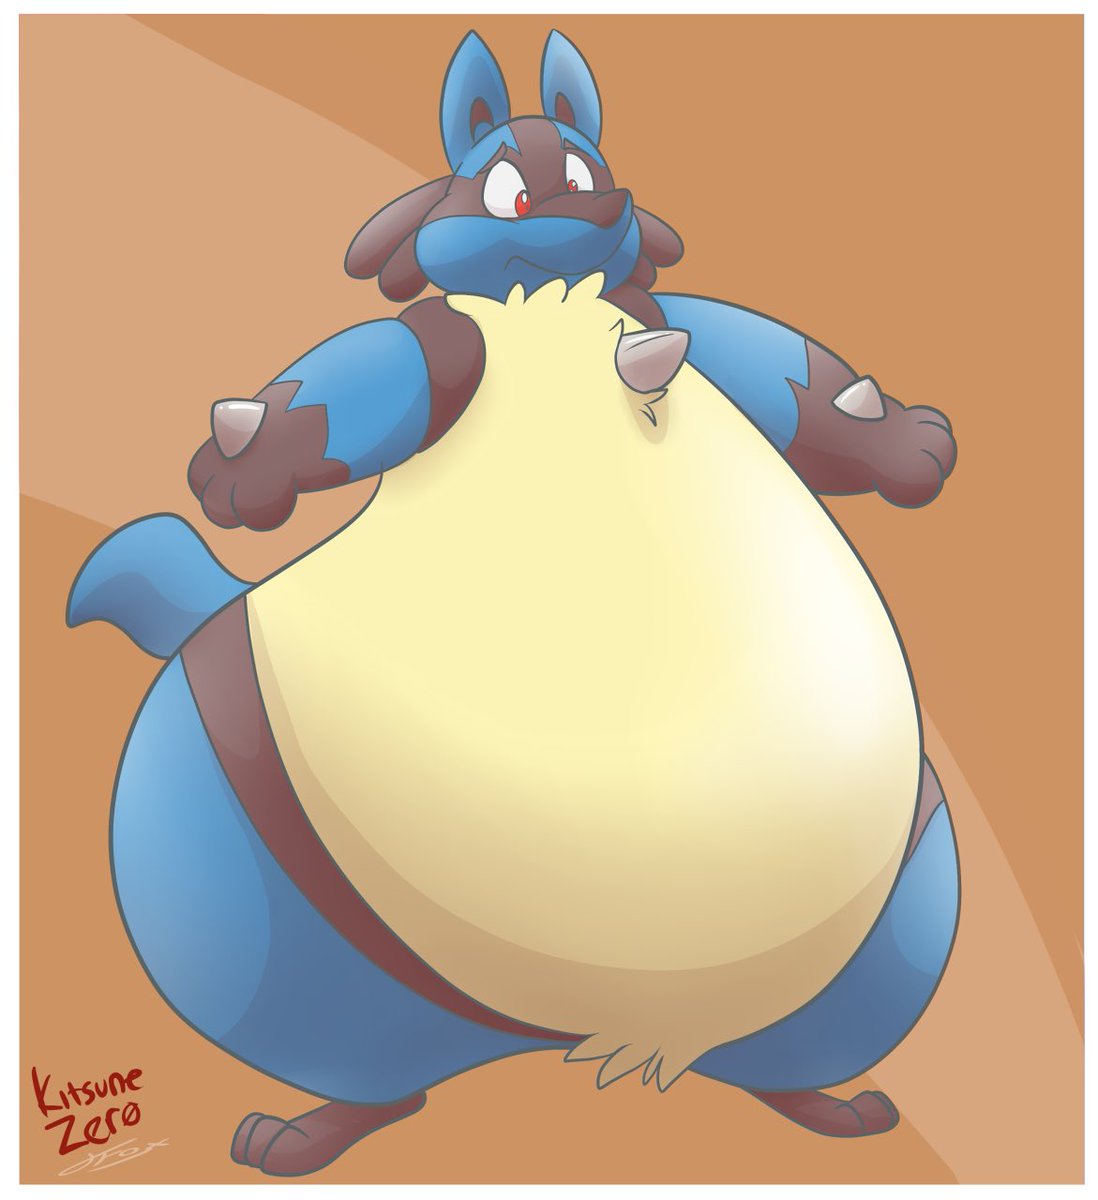 To me, Lucario might be the most popular Pokémon to inflate. // #art #fat #...